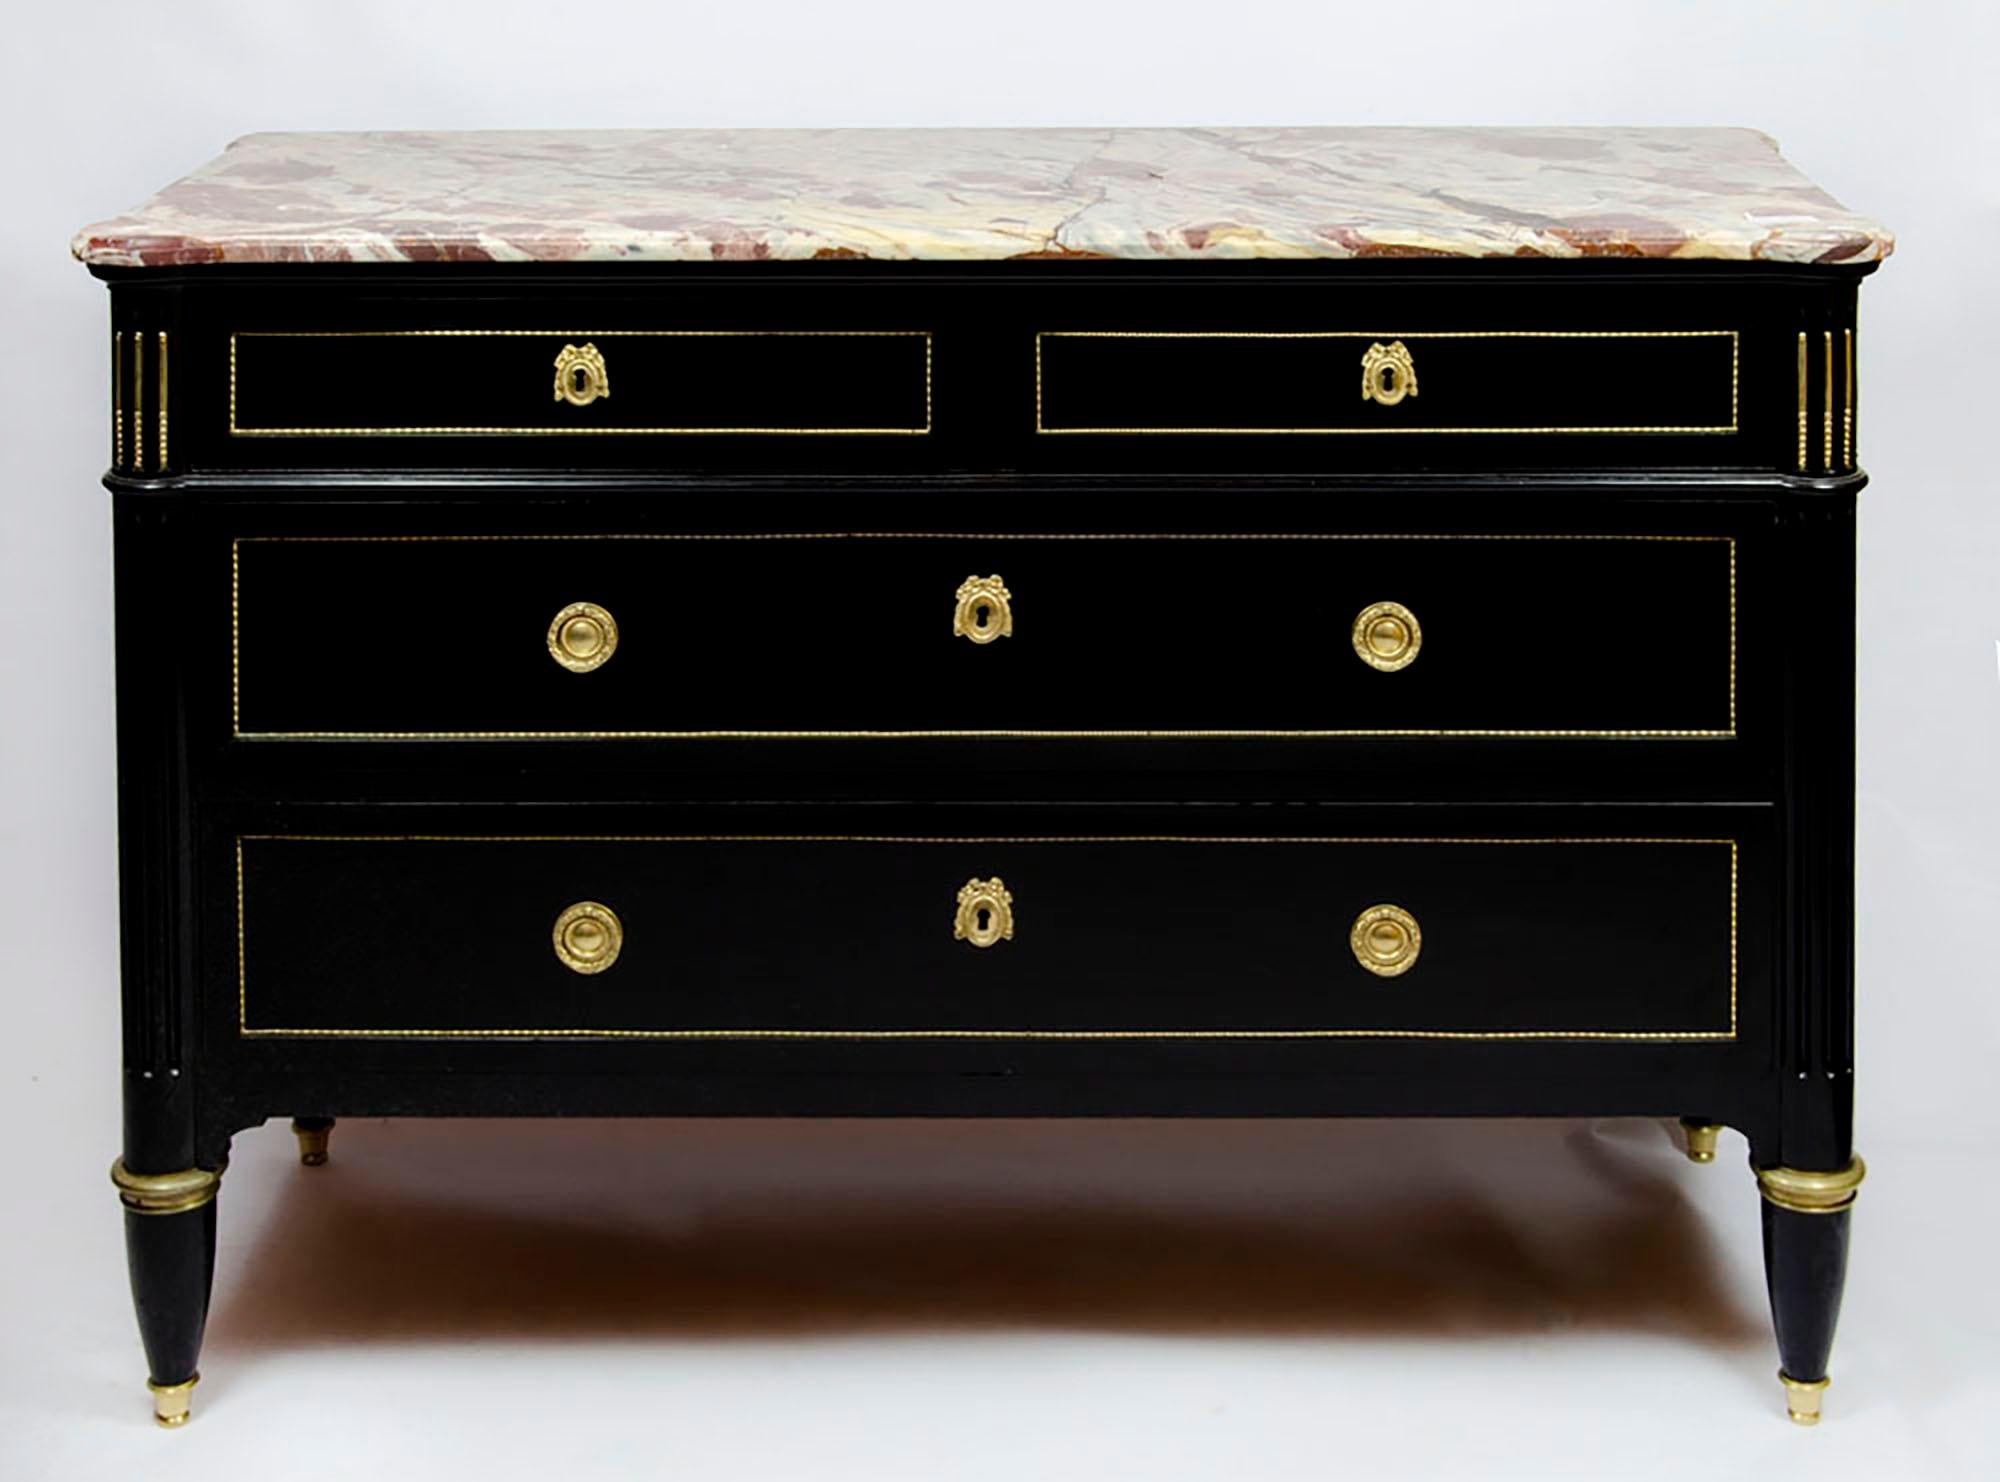 This elegant French dresser or chest of drawers, in the style of Maison Jansen. The Louis XVI-inspired profile with sturdy bronze-trimmed legs contains a set of two-over-two drawers that are also framed in bronze. Tassel-patterned drawer pulls and